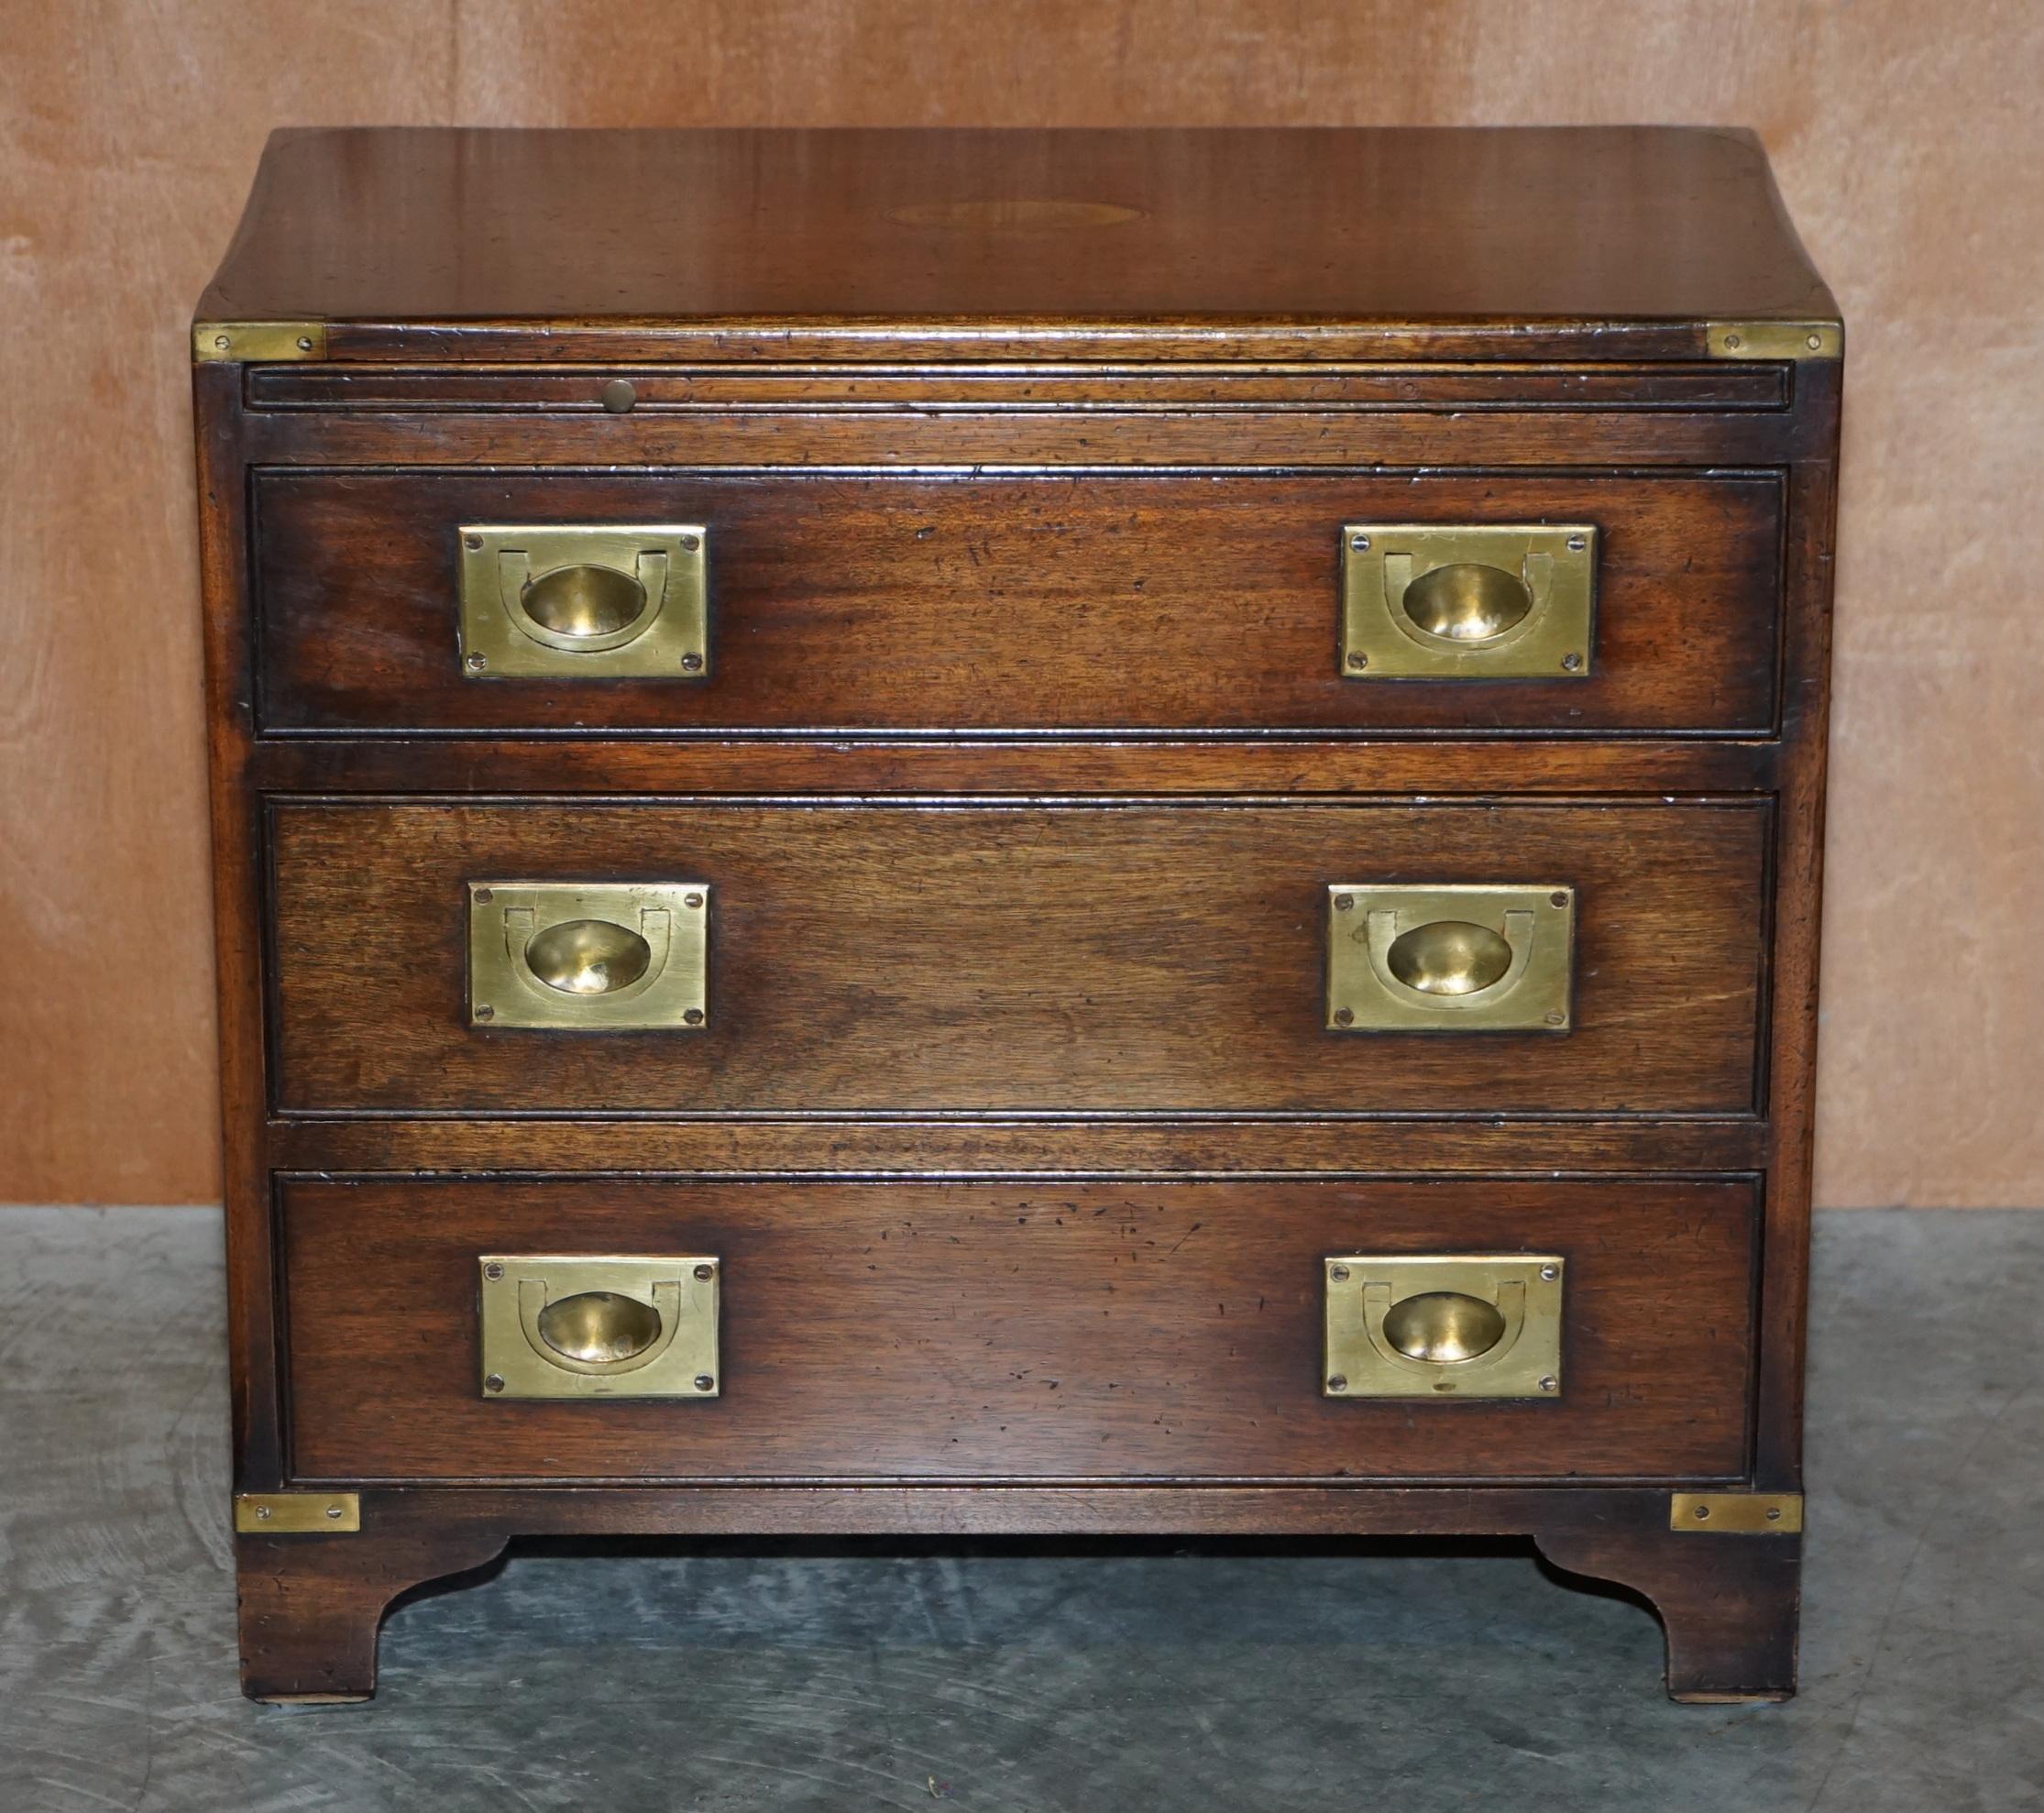 We are delighted to offer this lovely Harrods Kennedy Military Campaign bedside table sized Bachelors chest of drawers with slip serving tray

This piece was made by R.E.H Kennedy and retailed through Harrods London, its solid mahogany and comes